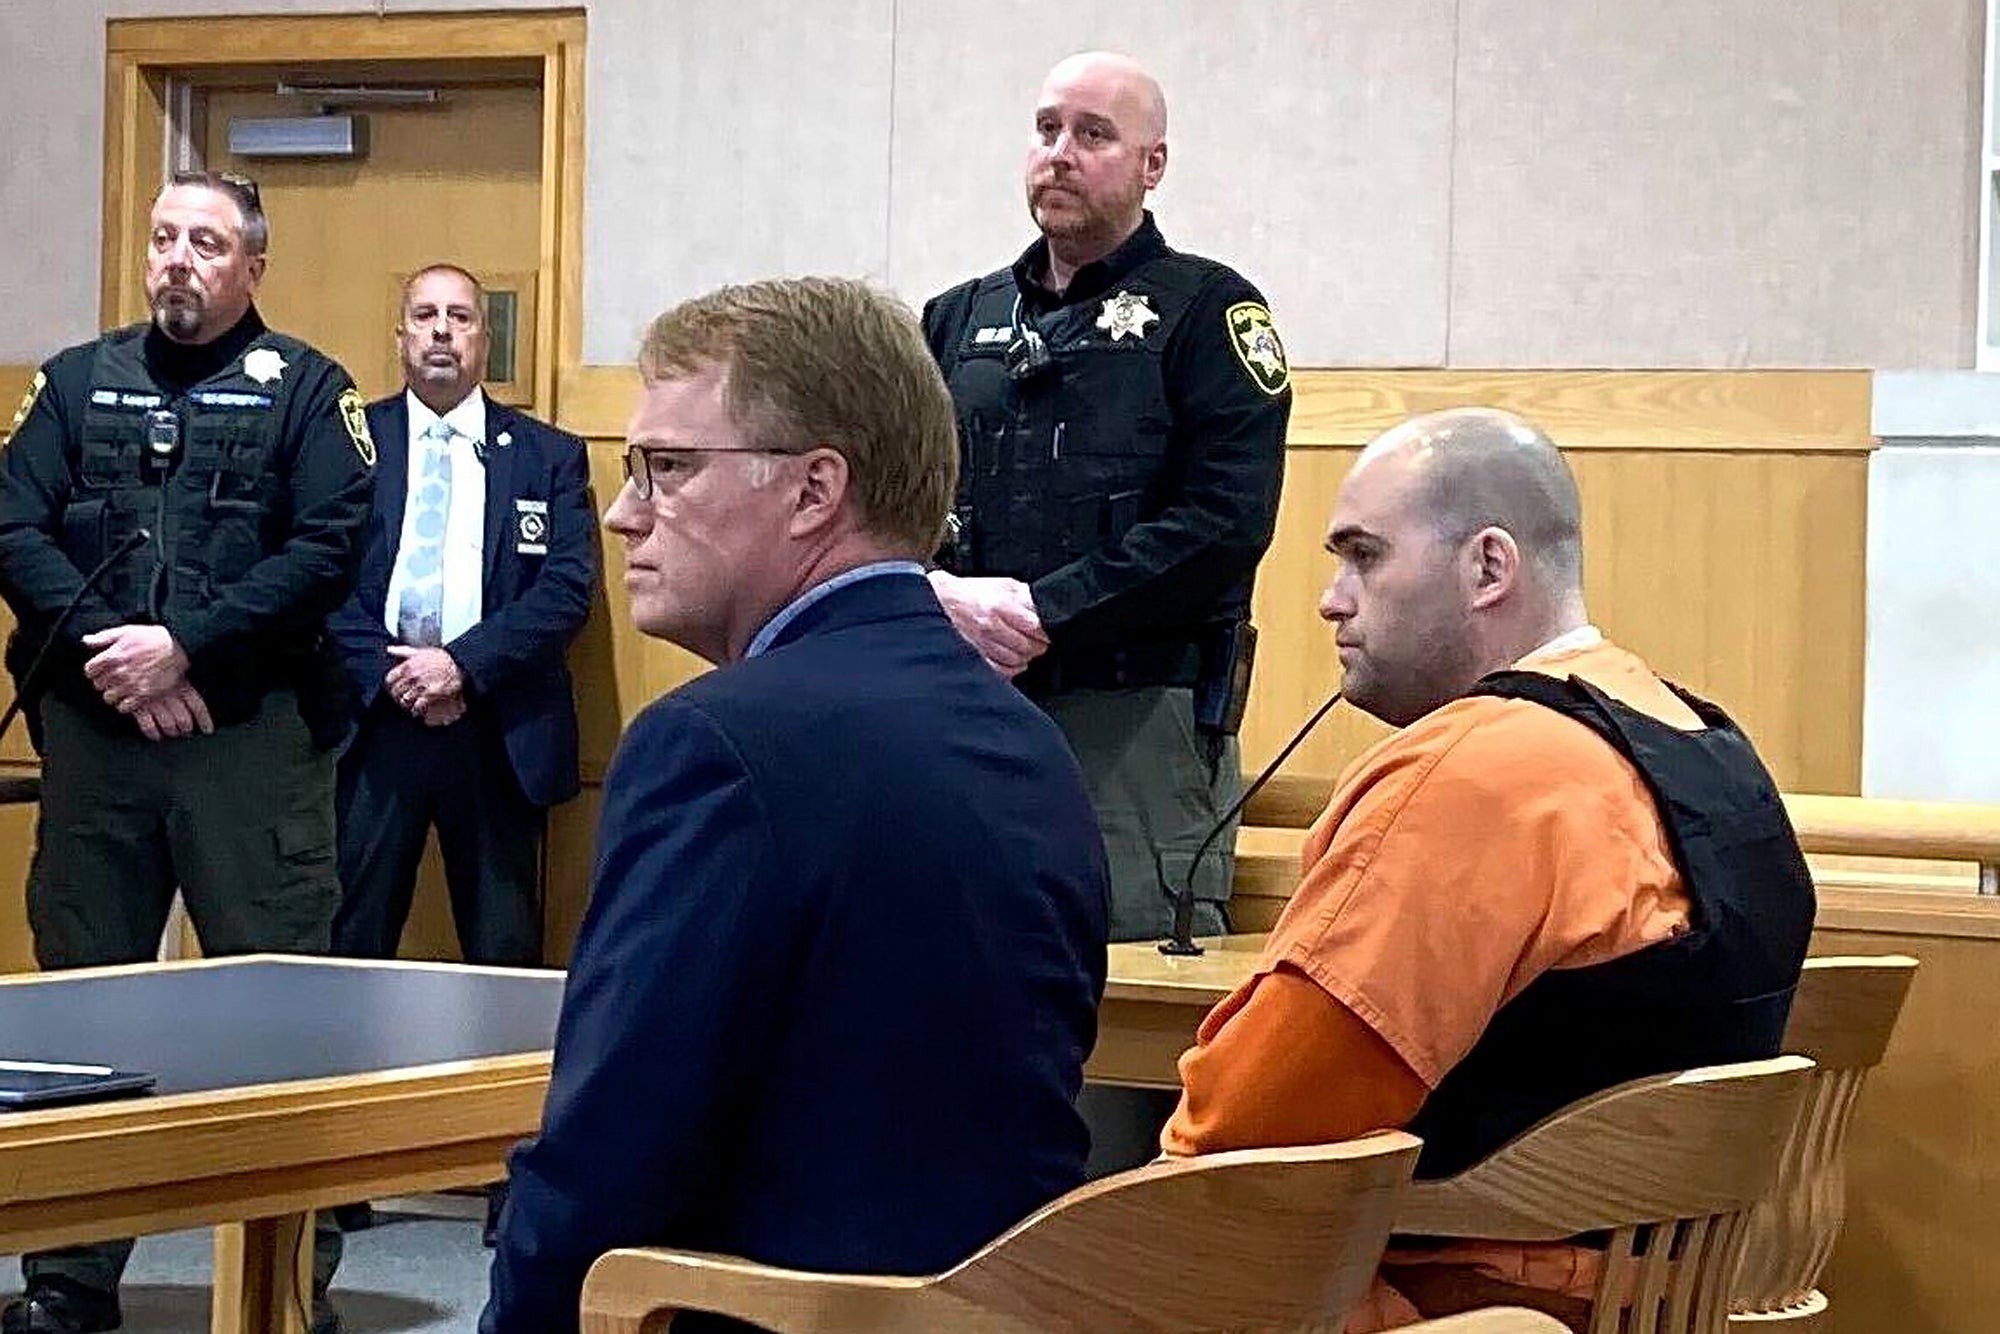 Joseph Eaton, the suspect in a shooting spree in Maine, appears in court in West Bath, Maine, Thursday, April 20, 2023